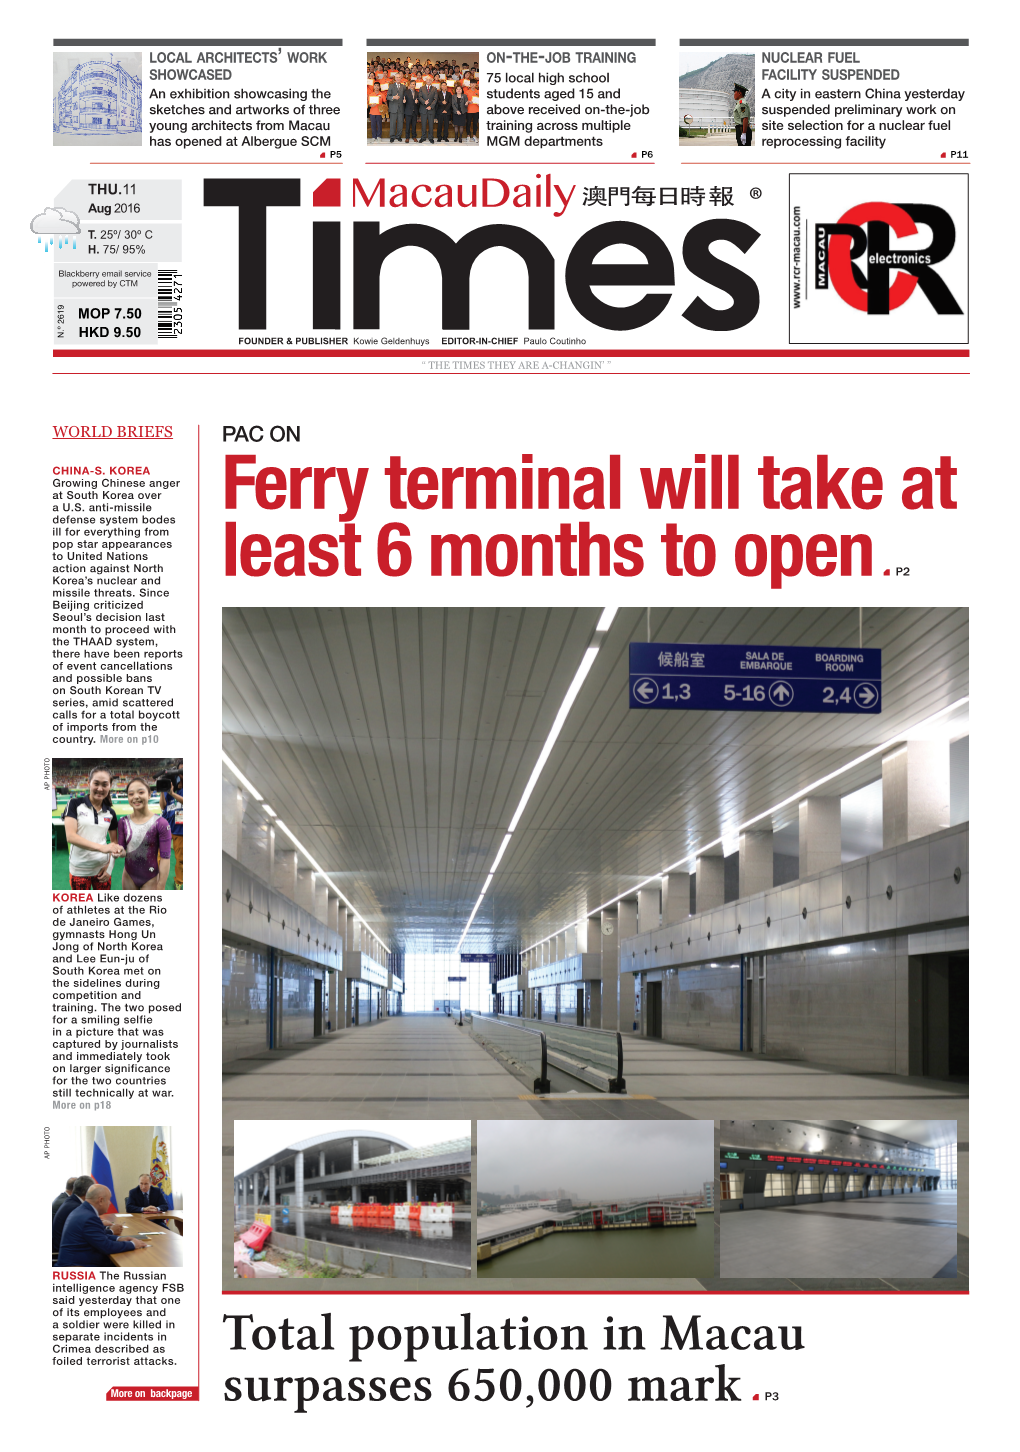 Ferry Terminal Will Take at Least 6 Months to Open P2